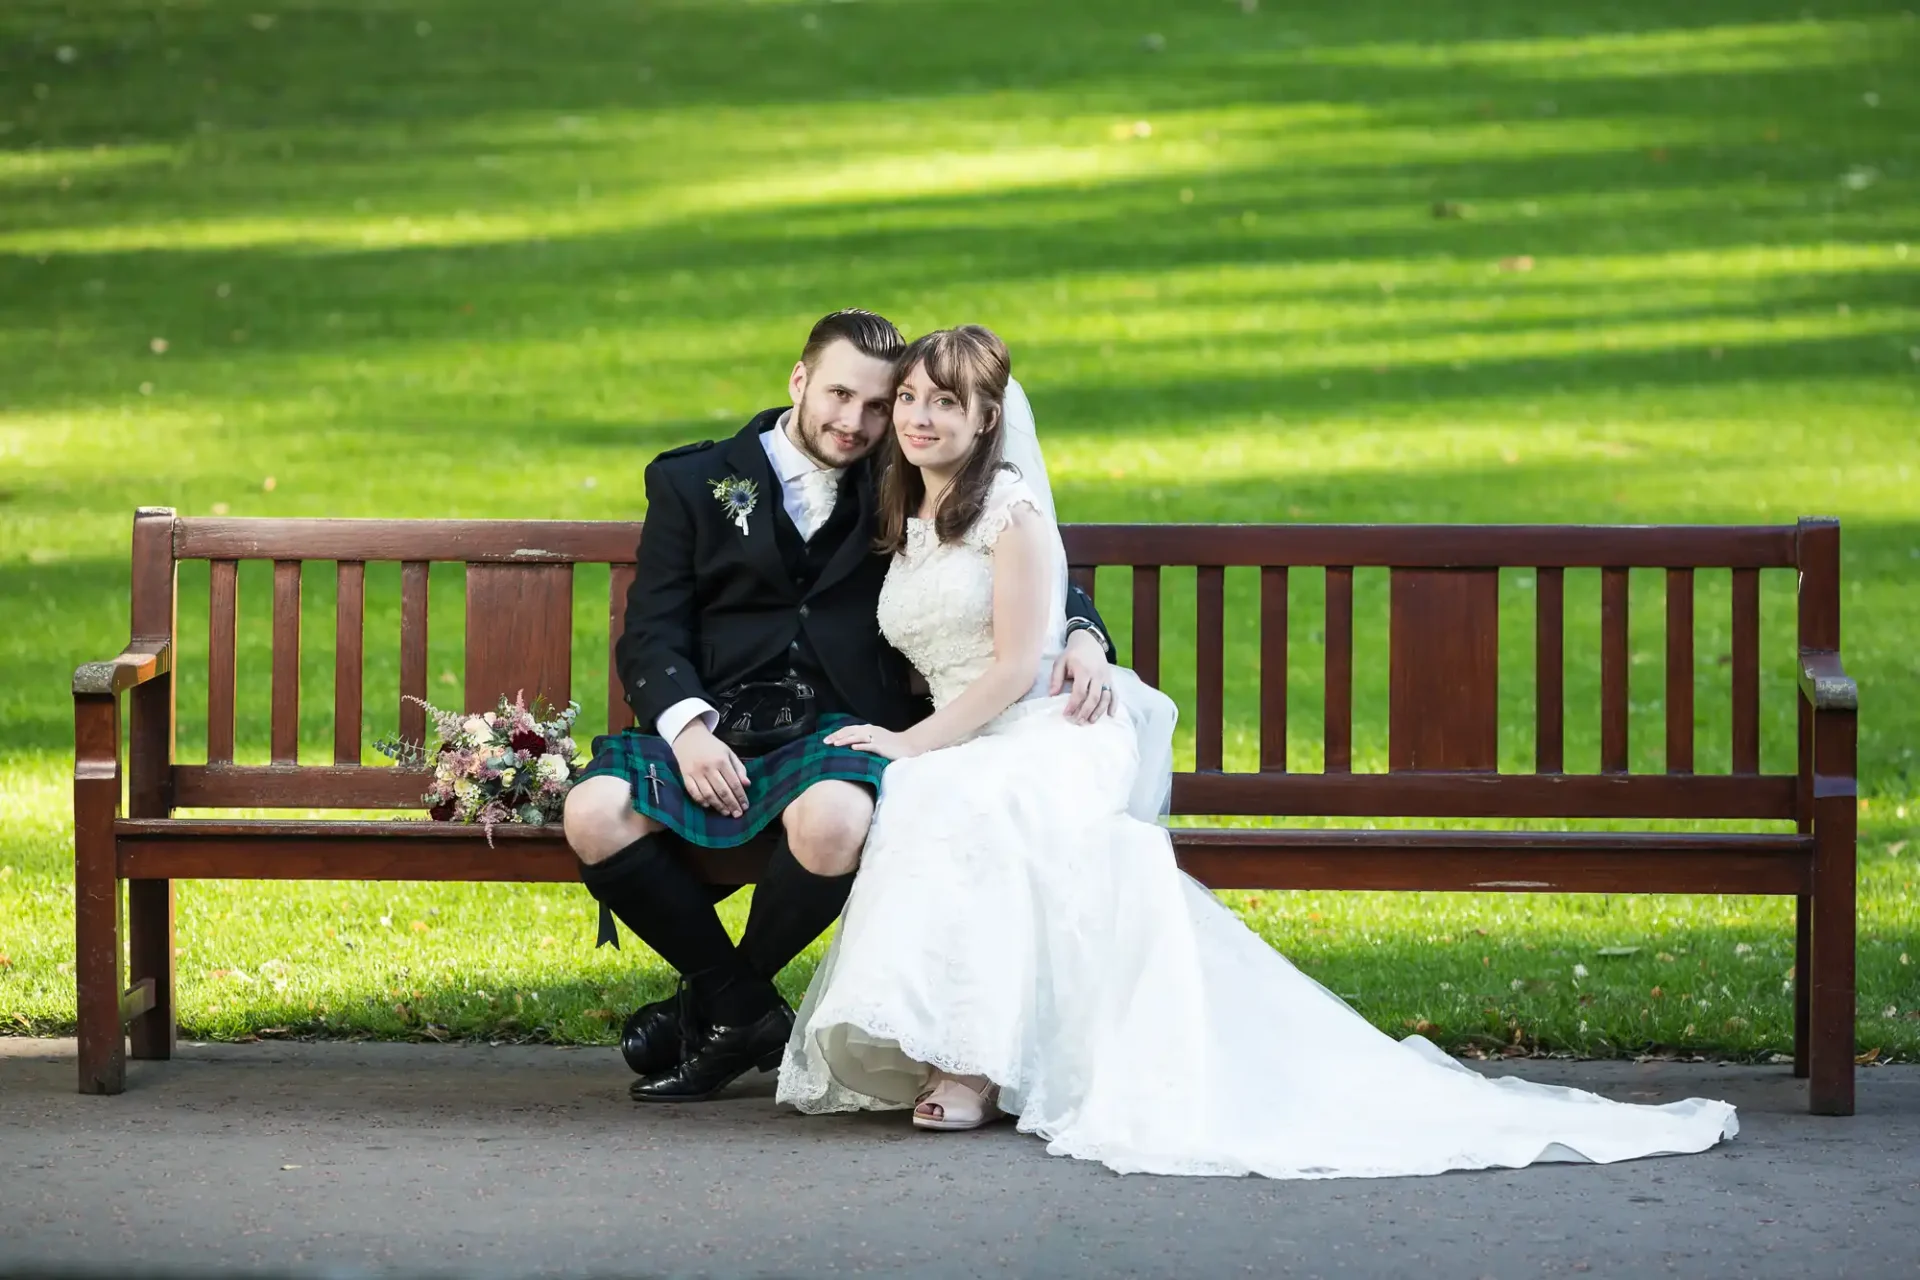 A newlywed couple in wedding attire sitting on a park bench, smiling at the camera, surrounded by green grass.